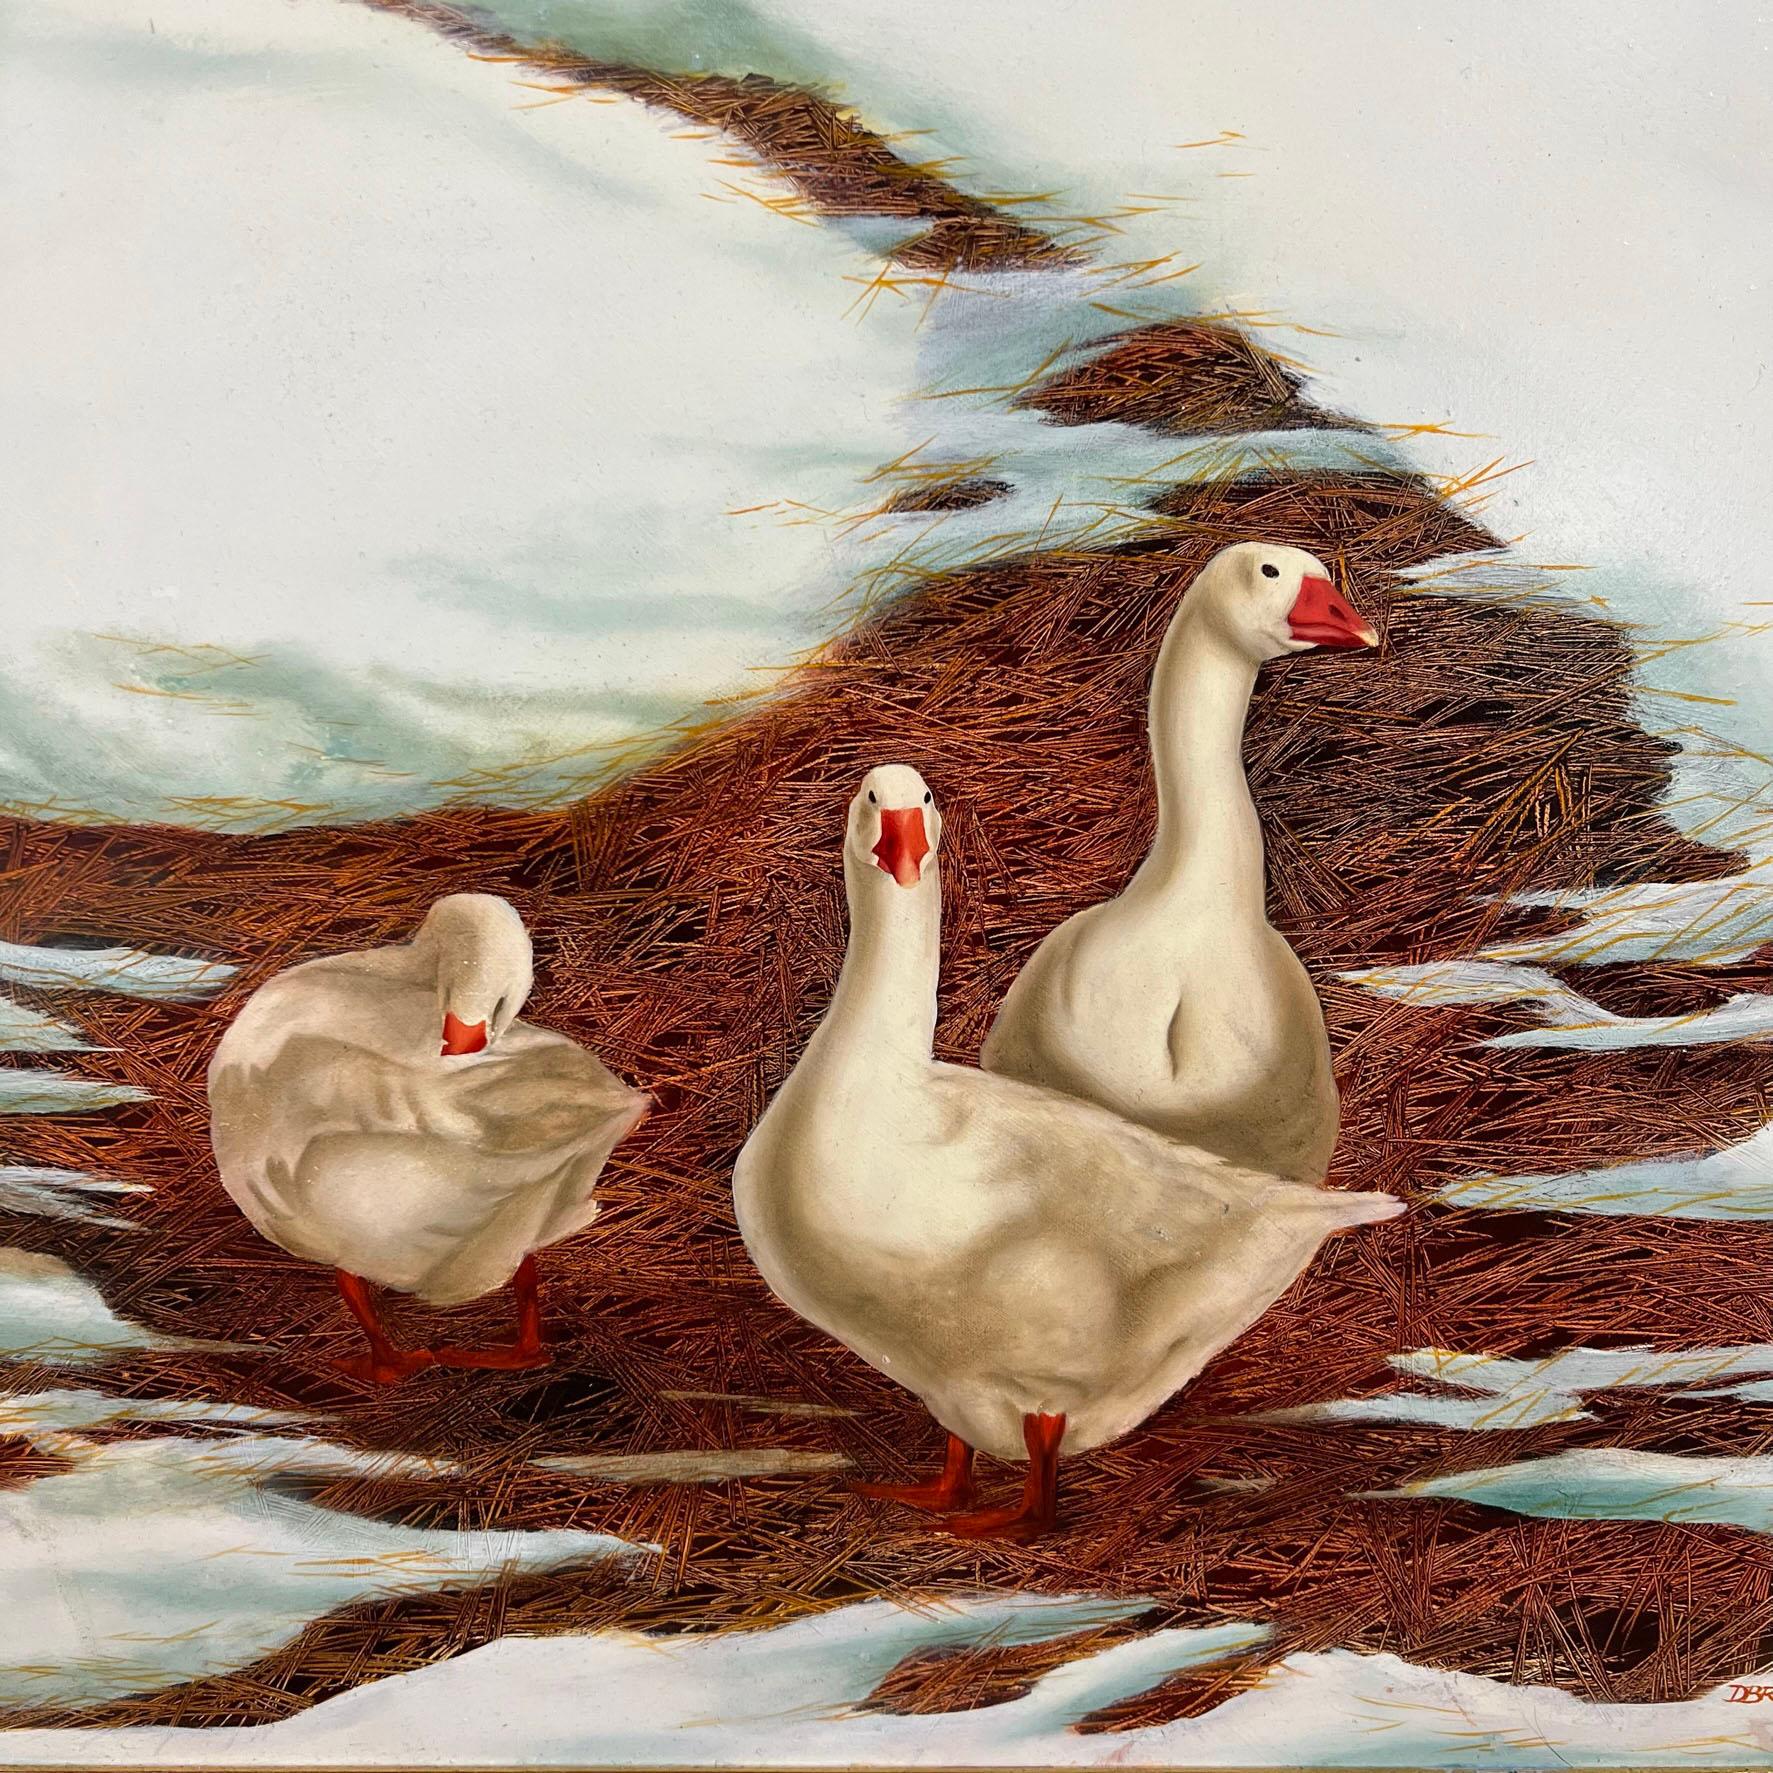 A masterful American Realist painting of geese in the snow by the noted tromp l'oeil artist David Brega, circa early 1970s. It’s hard not to draw parallels between this diagonal composition, with its elongated hillside and weathered farmhouse